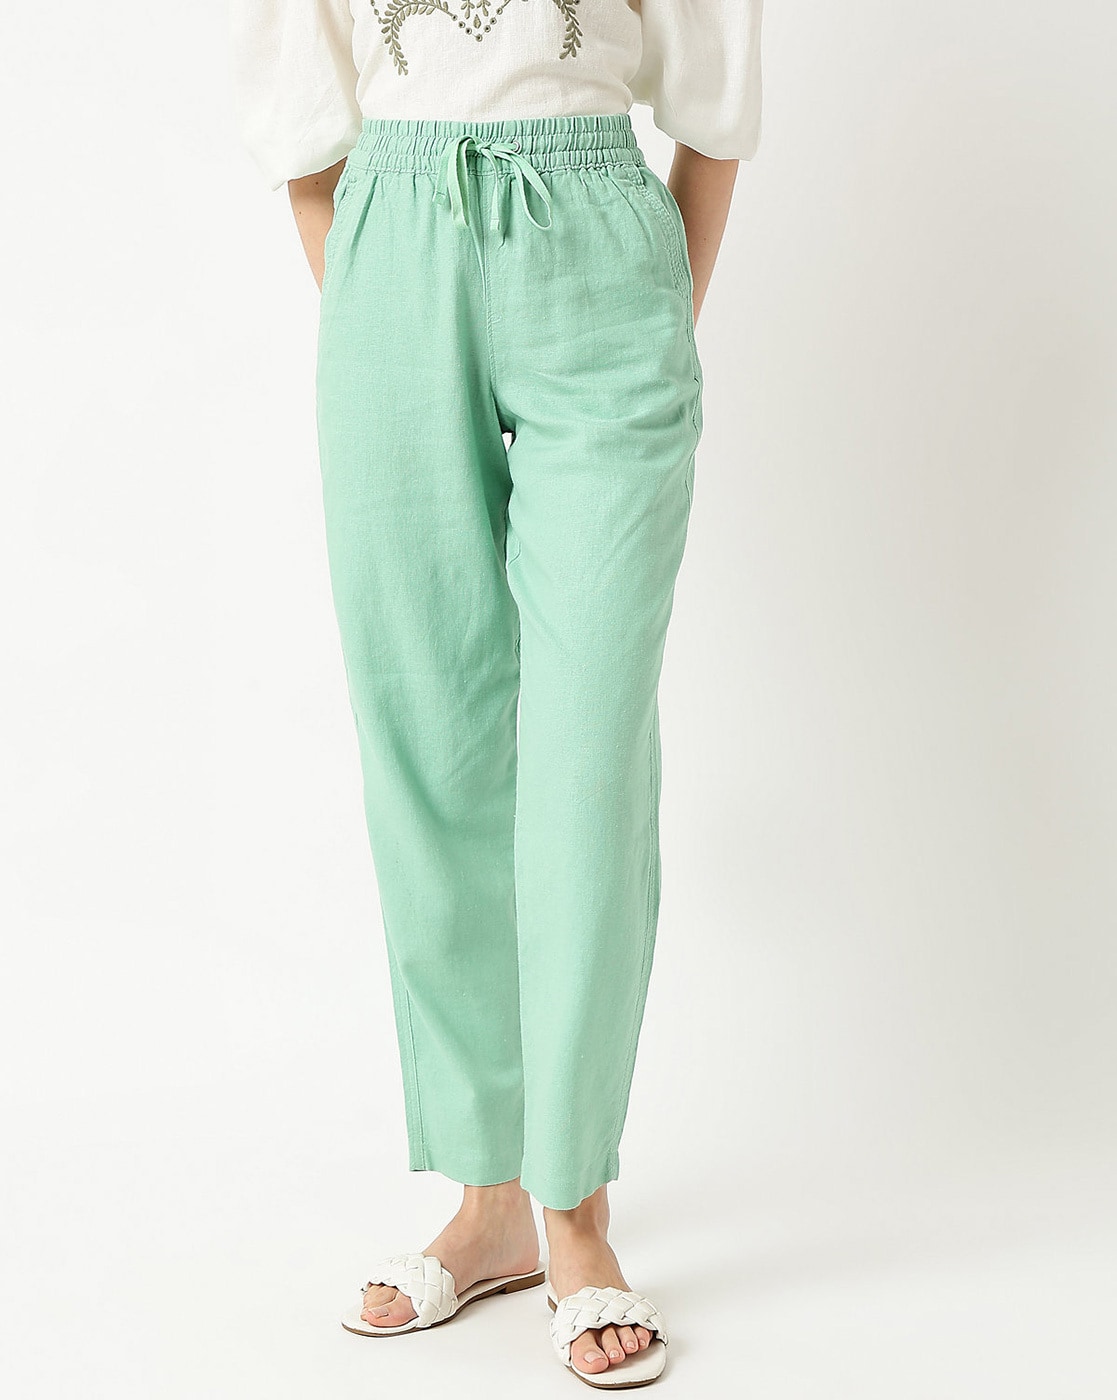 Slim Ankle Linen Trousers, Linen Pants High Waisted, Women Pants With Belt,  Tapered Linen Pants 